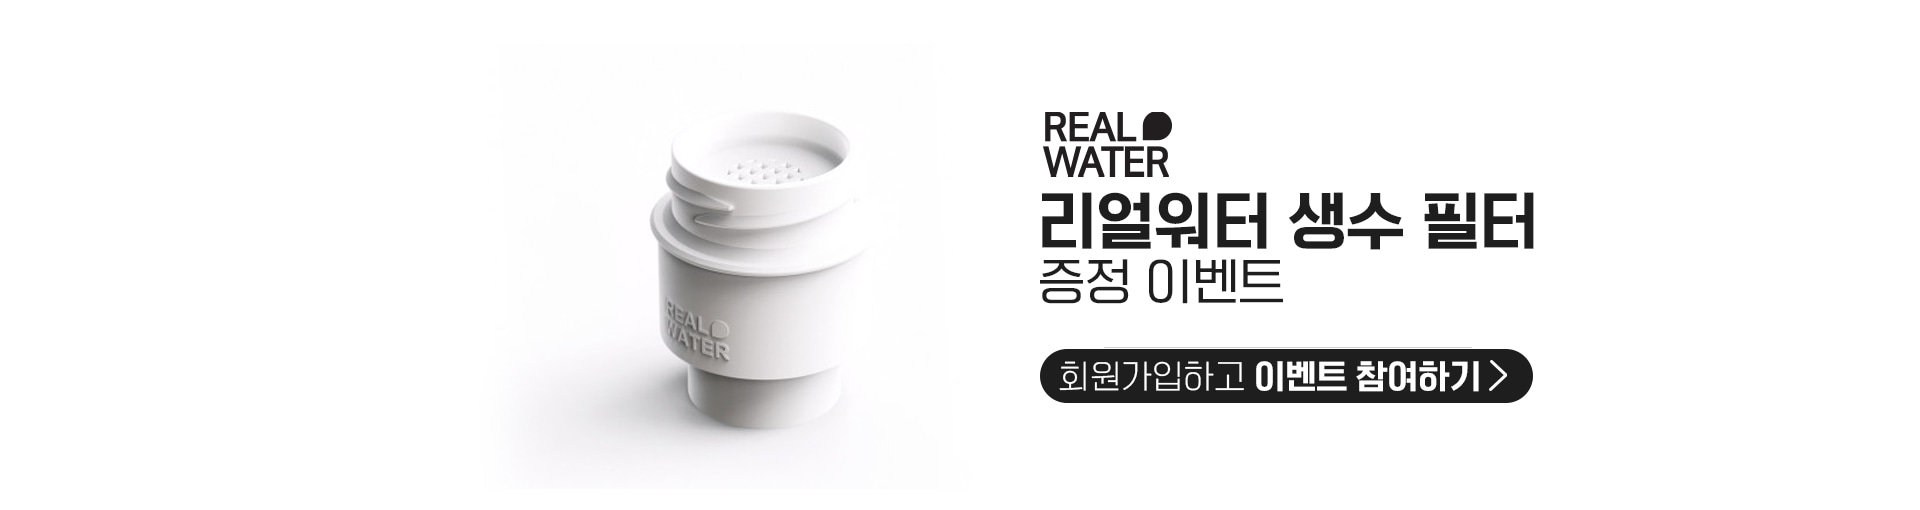 5month_realwater